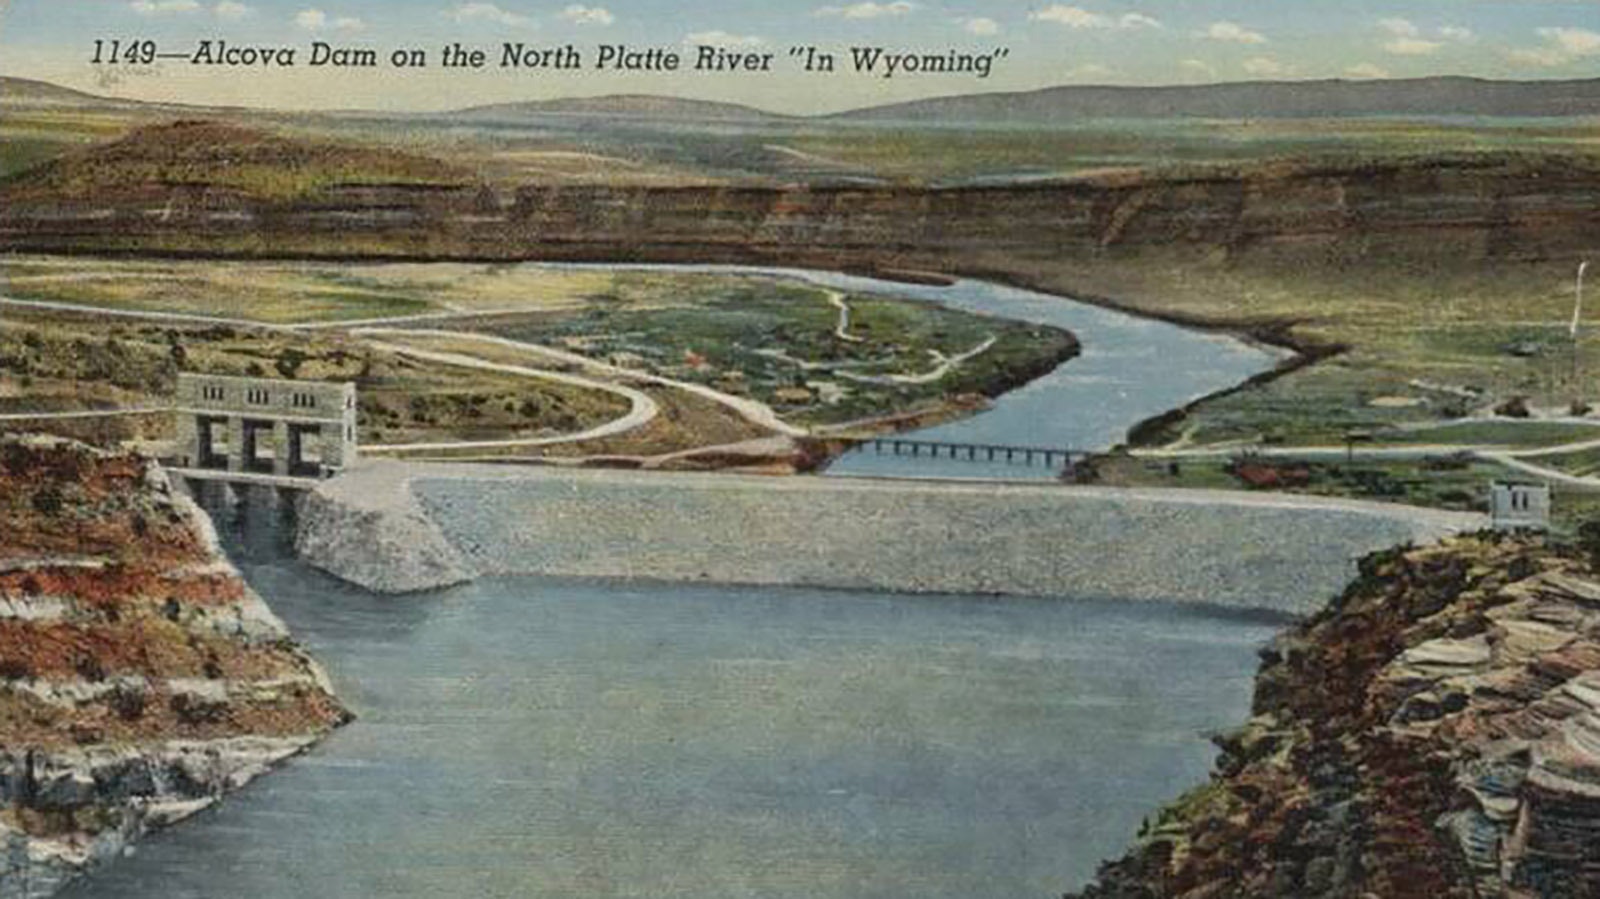 A postcard showing the Alcova Dam following its completion. The dam serves to help provide irrigation water to the Casper region.